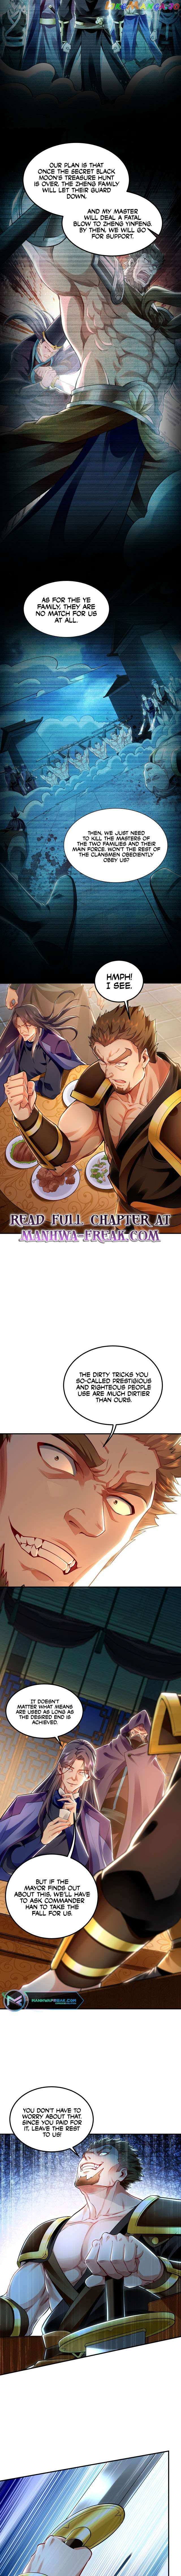 1 Million Times Attack Speed Chapter 15 - page 2